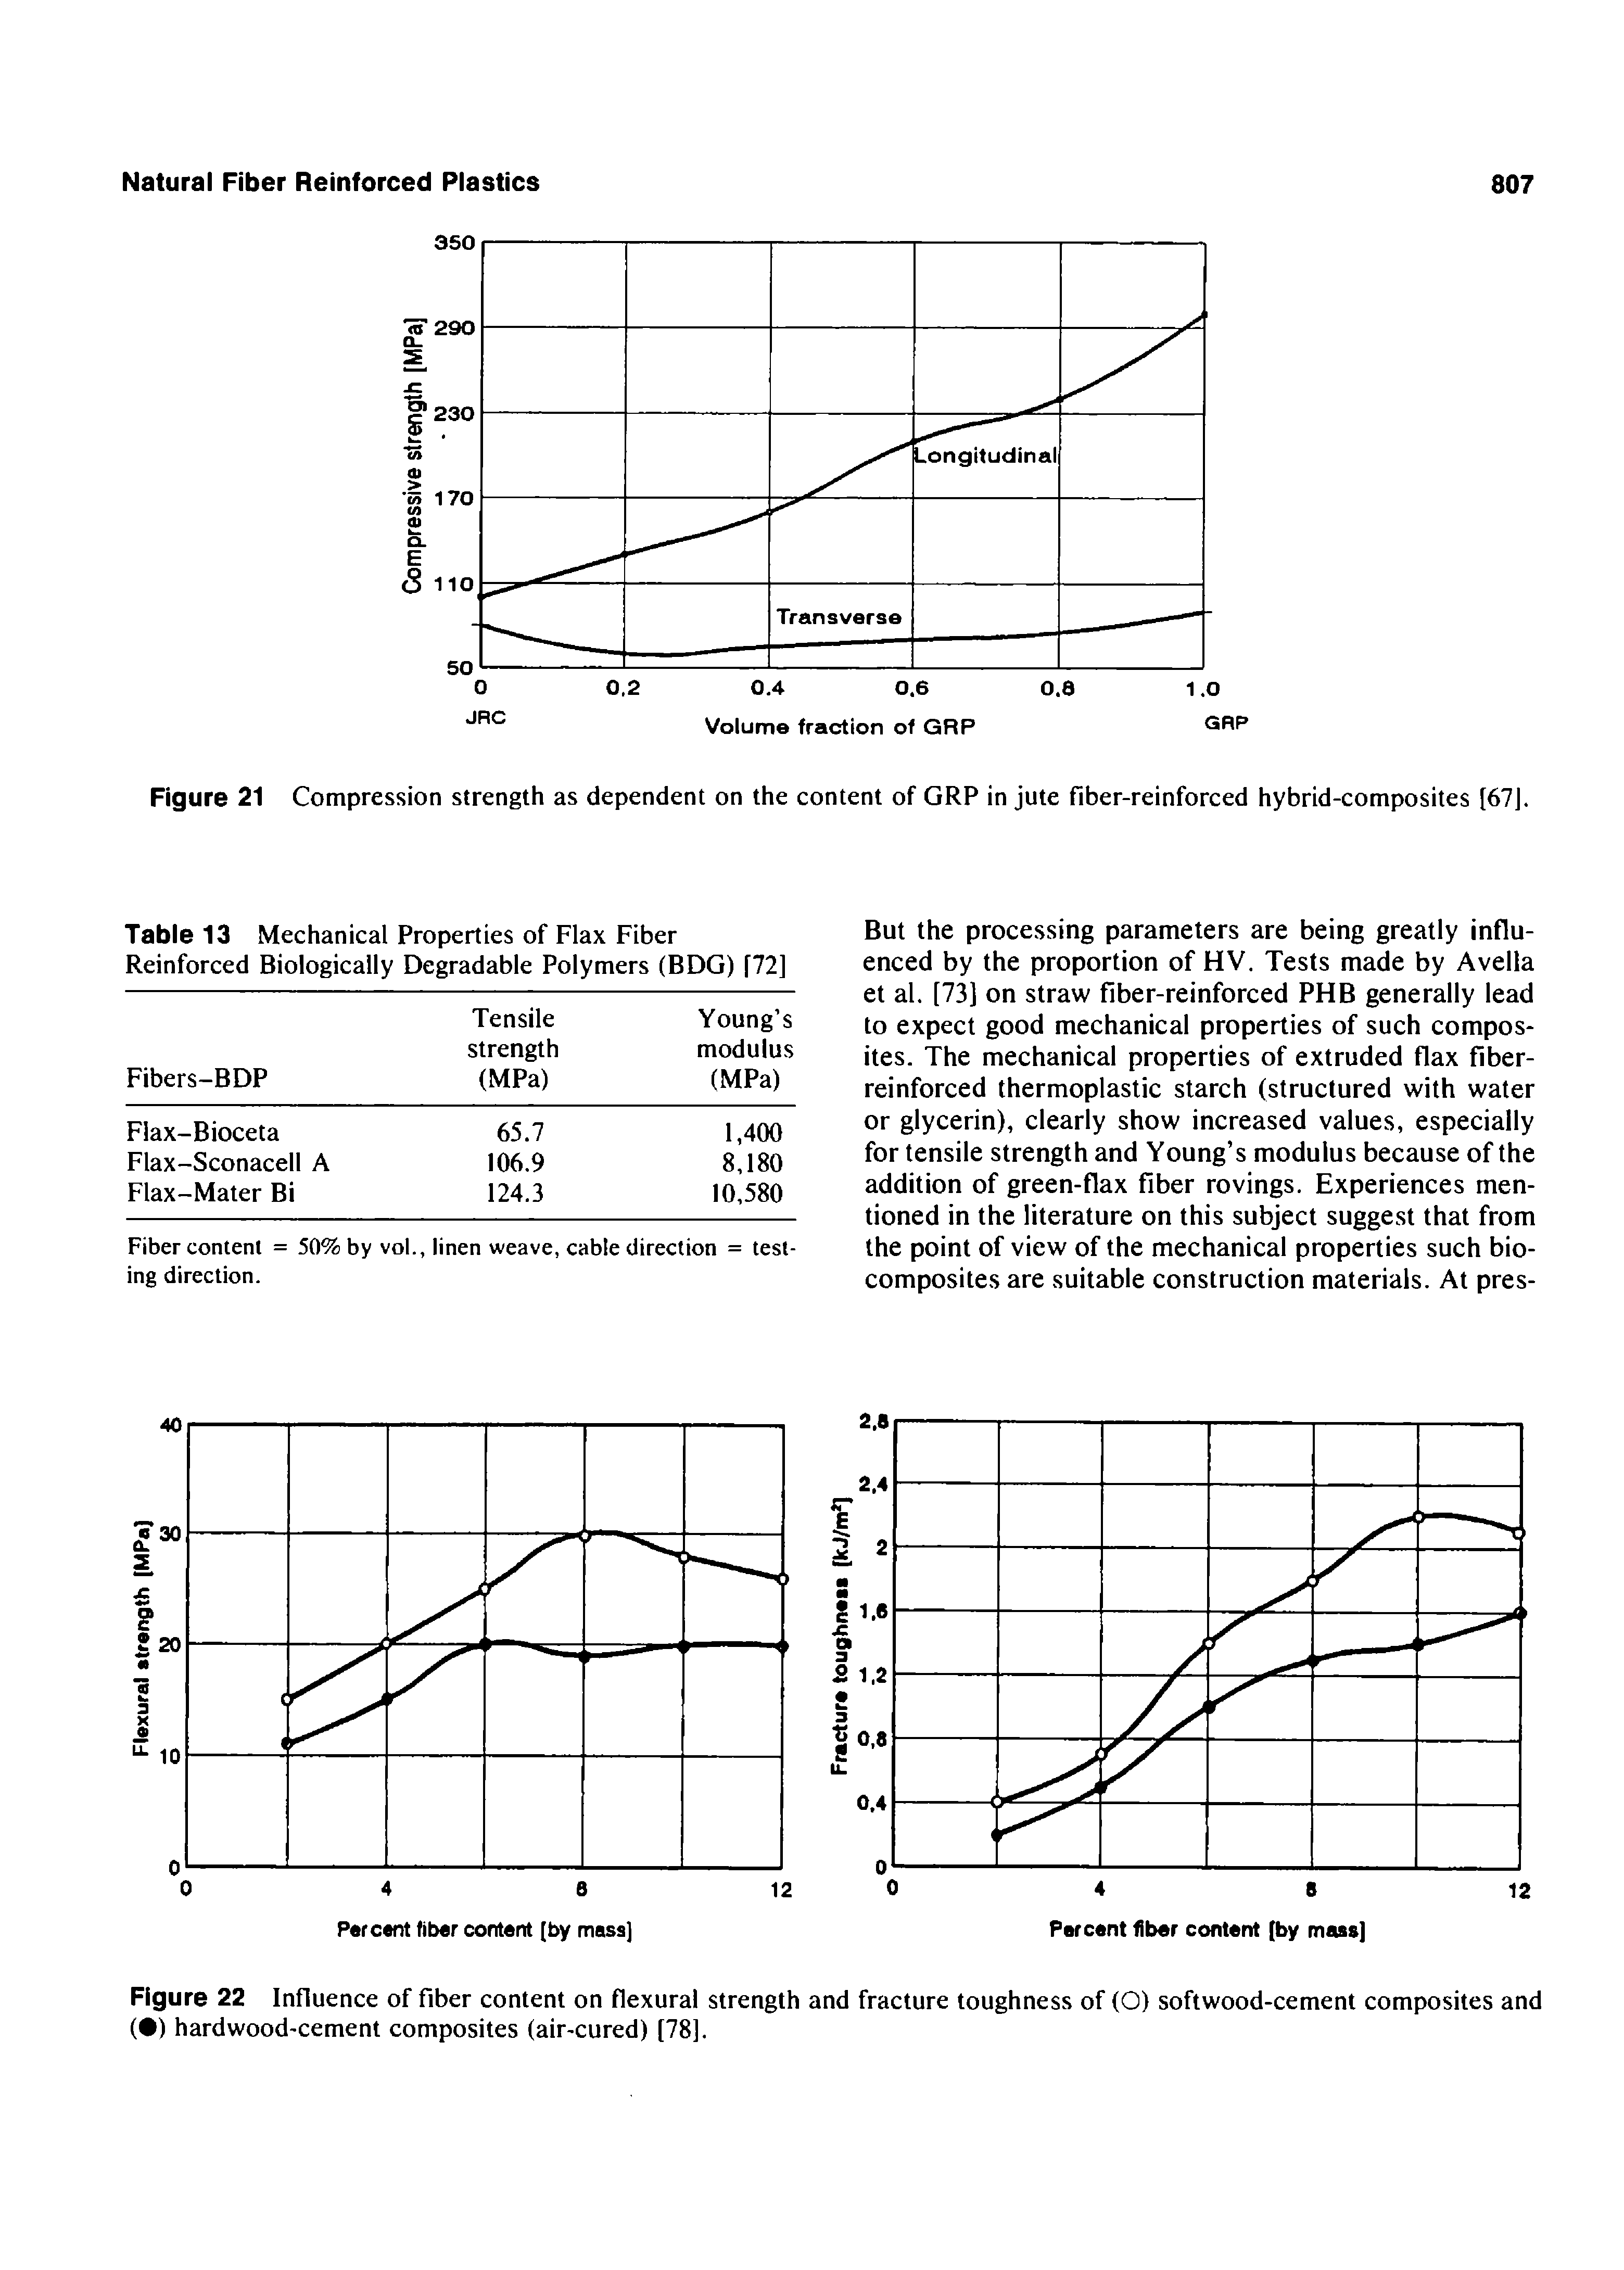 Figure 22 Influence of fiber content on flexural strength and fracture toughness of (O) softwood-cement composites and ( ) hardwood-cement composites (air-cured) [78].